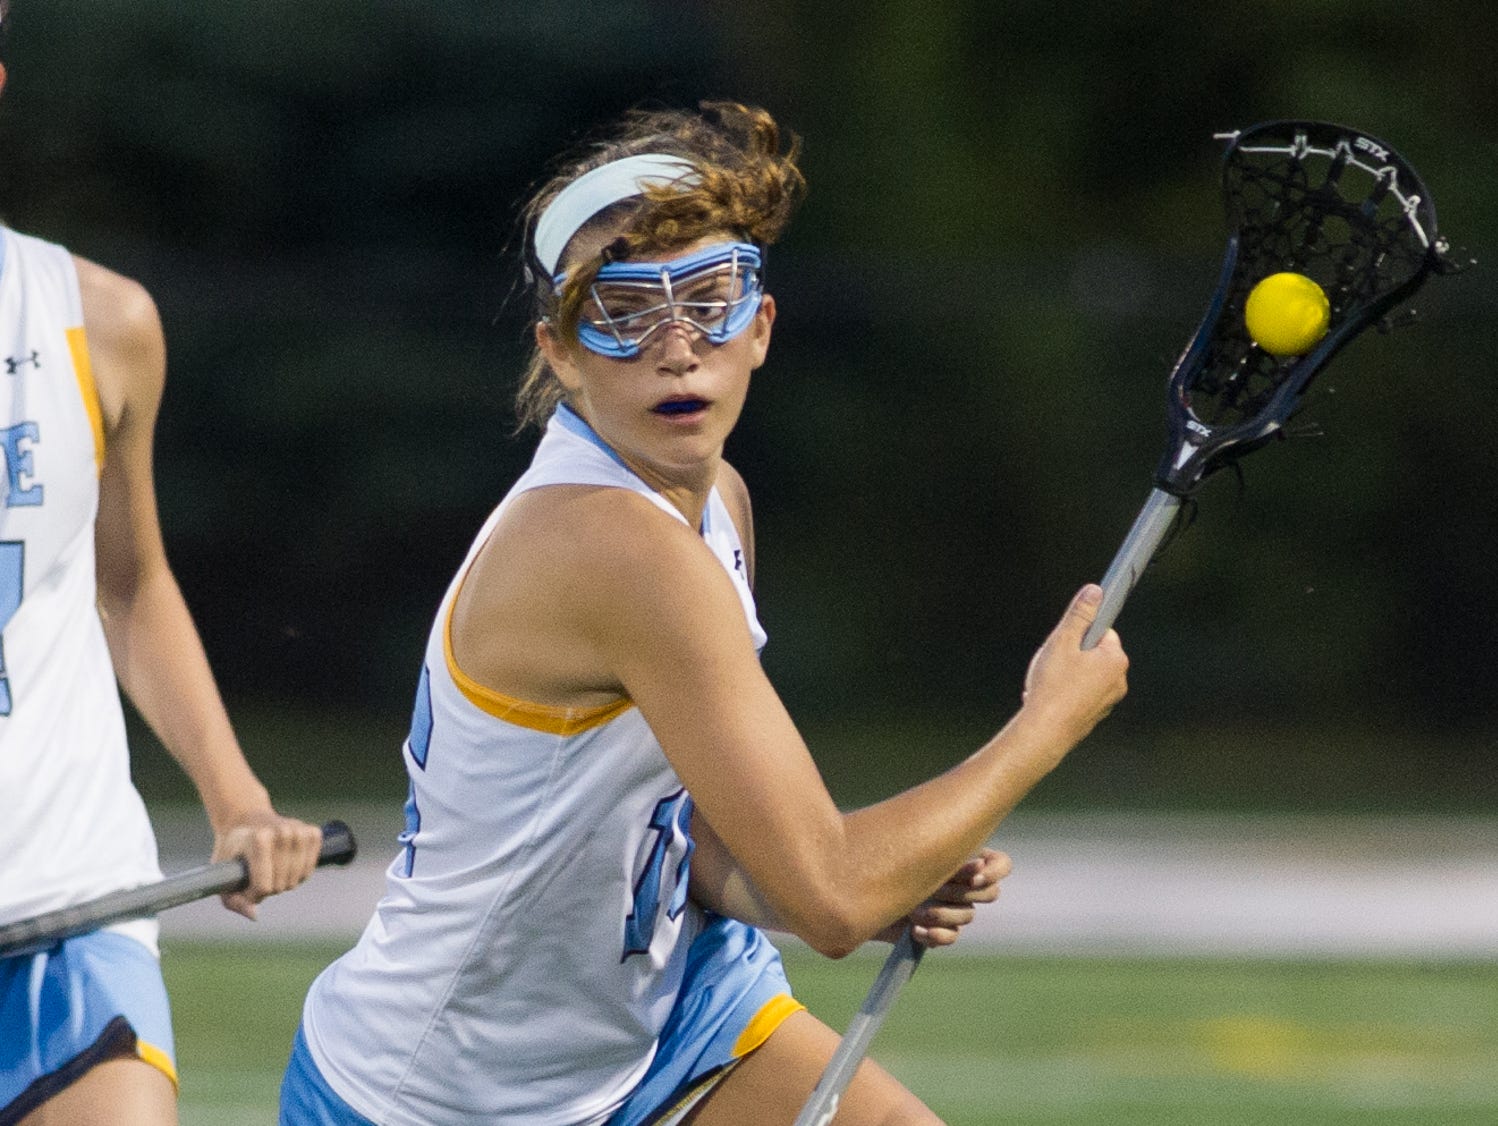 Cape Henlopen's Alia Marshall (16) runs down the field during the second have of play in the DIAA girls lacrosse championship game against Tower Hill at Wesley College in Dover.